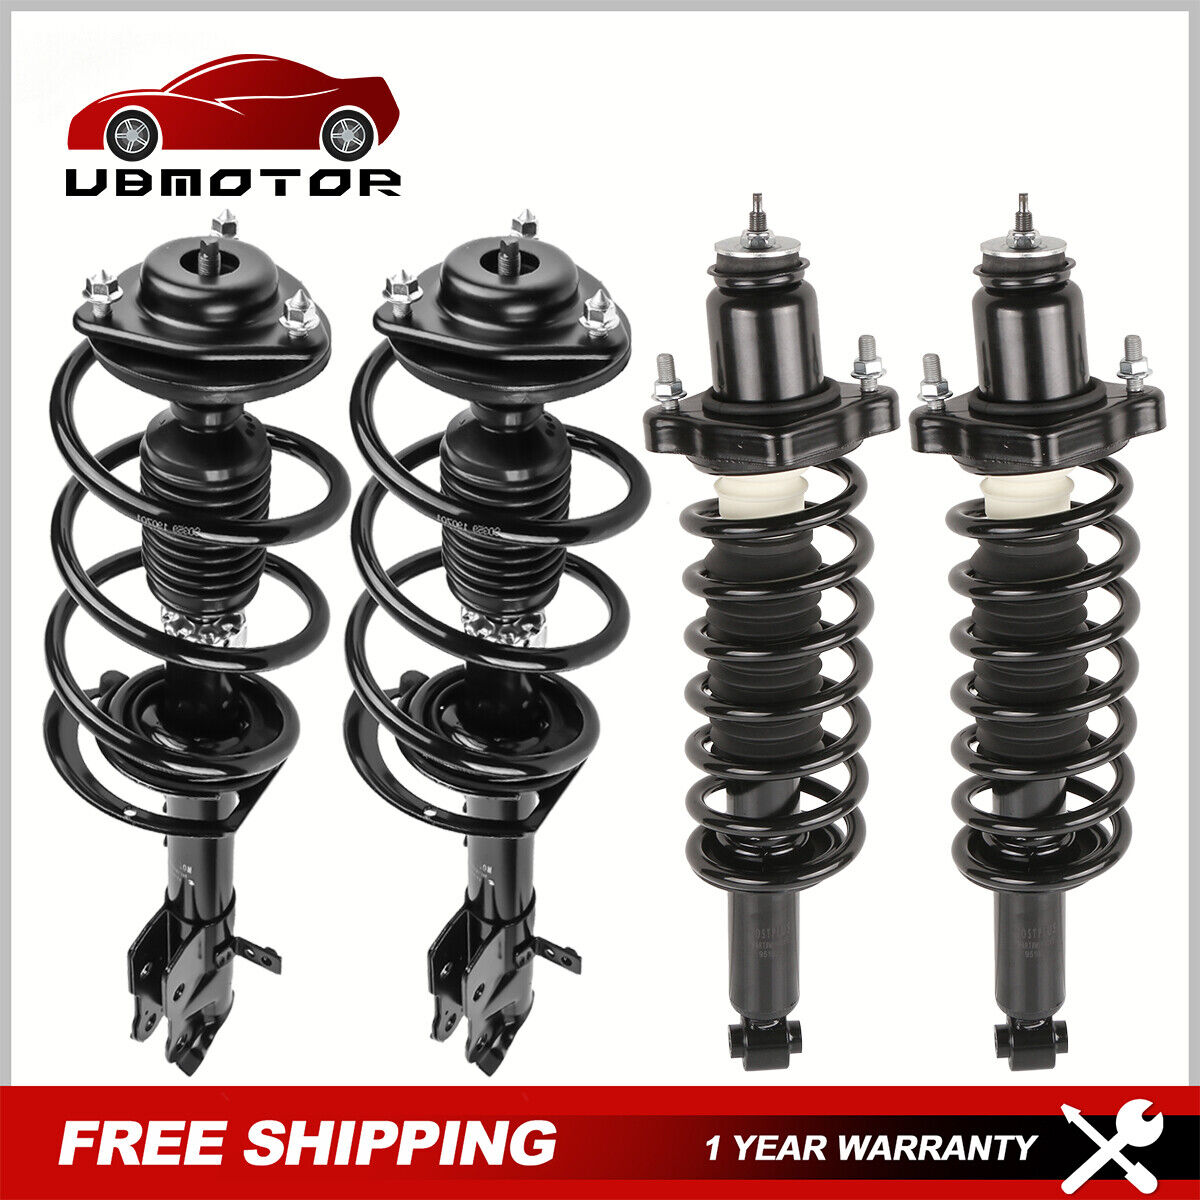 Set 4 Front+Rear Struts Shocks Absorbers For Jeep Compass Patriot Dodge Caliber